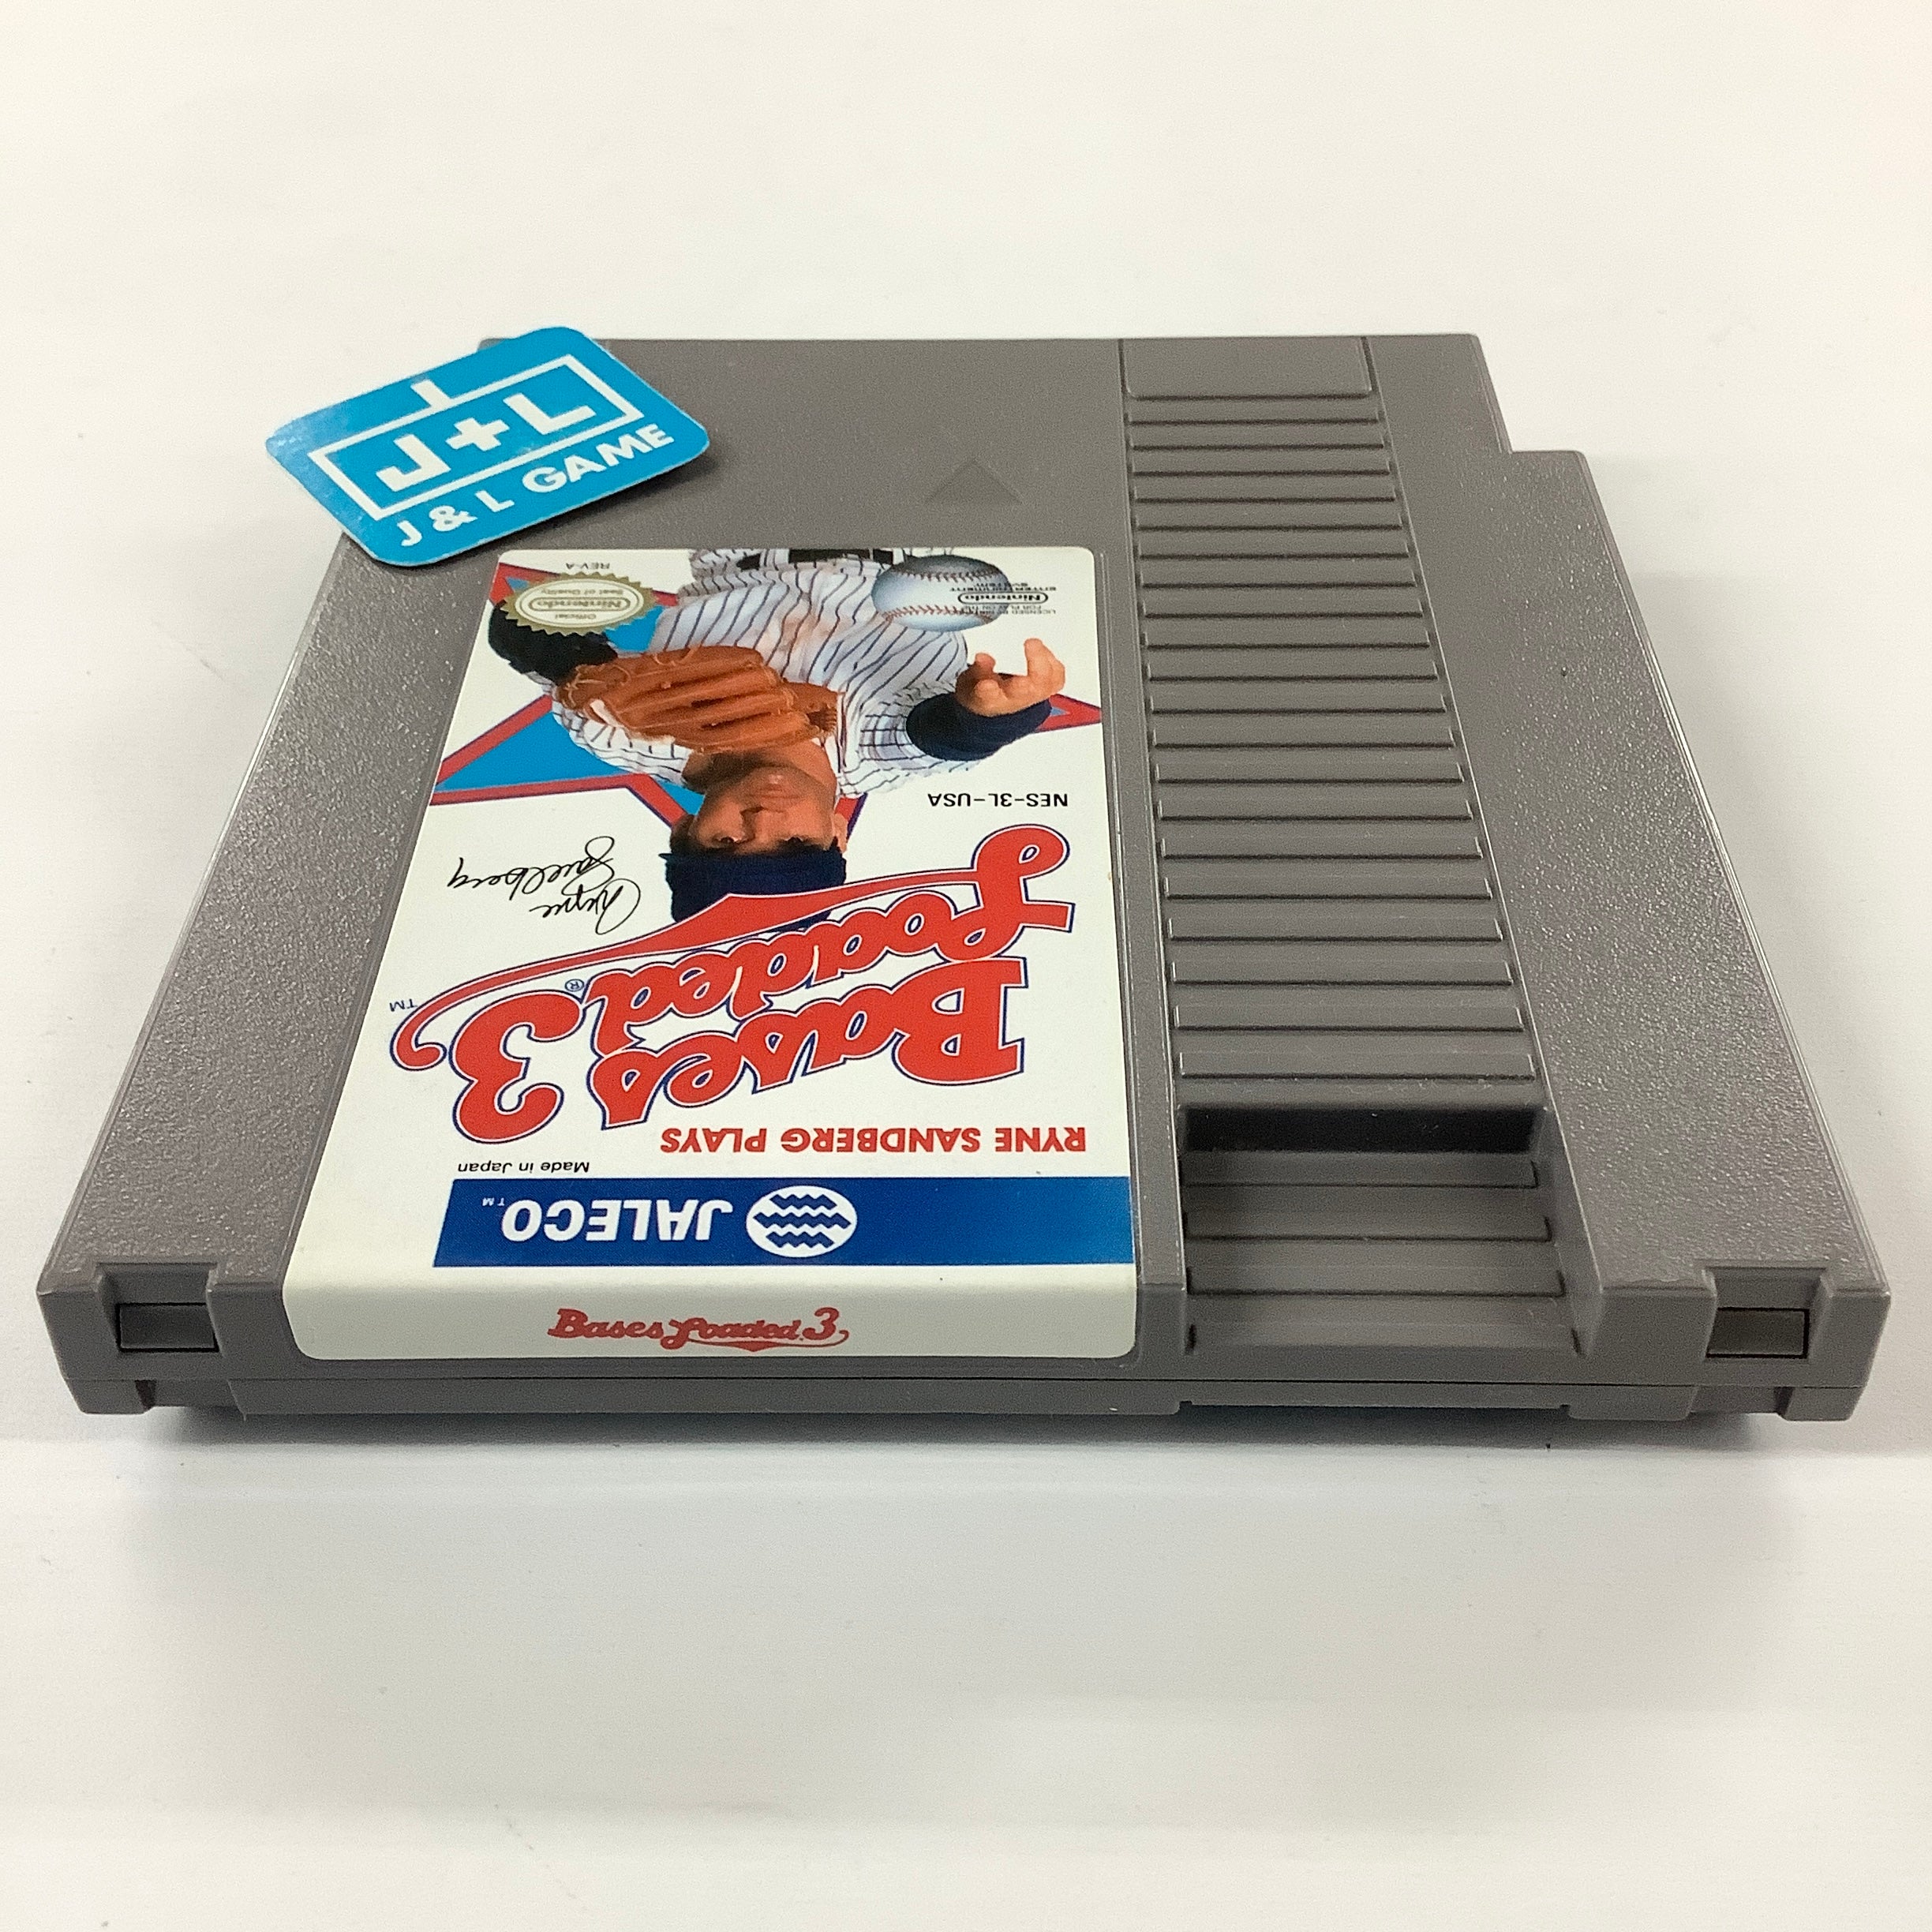 Bases Loaded 3 - (NES) Nintendo Entertainment System [Pre-Owned] Video Games Jaleco Entertainment   